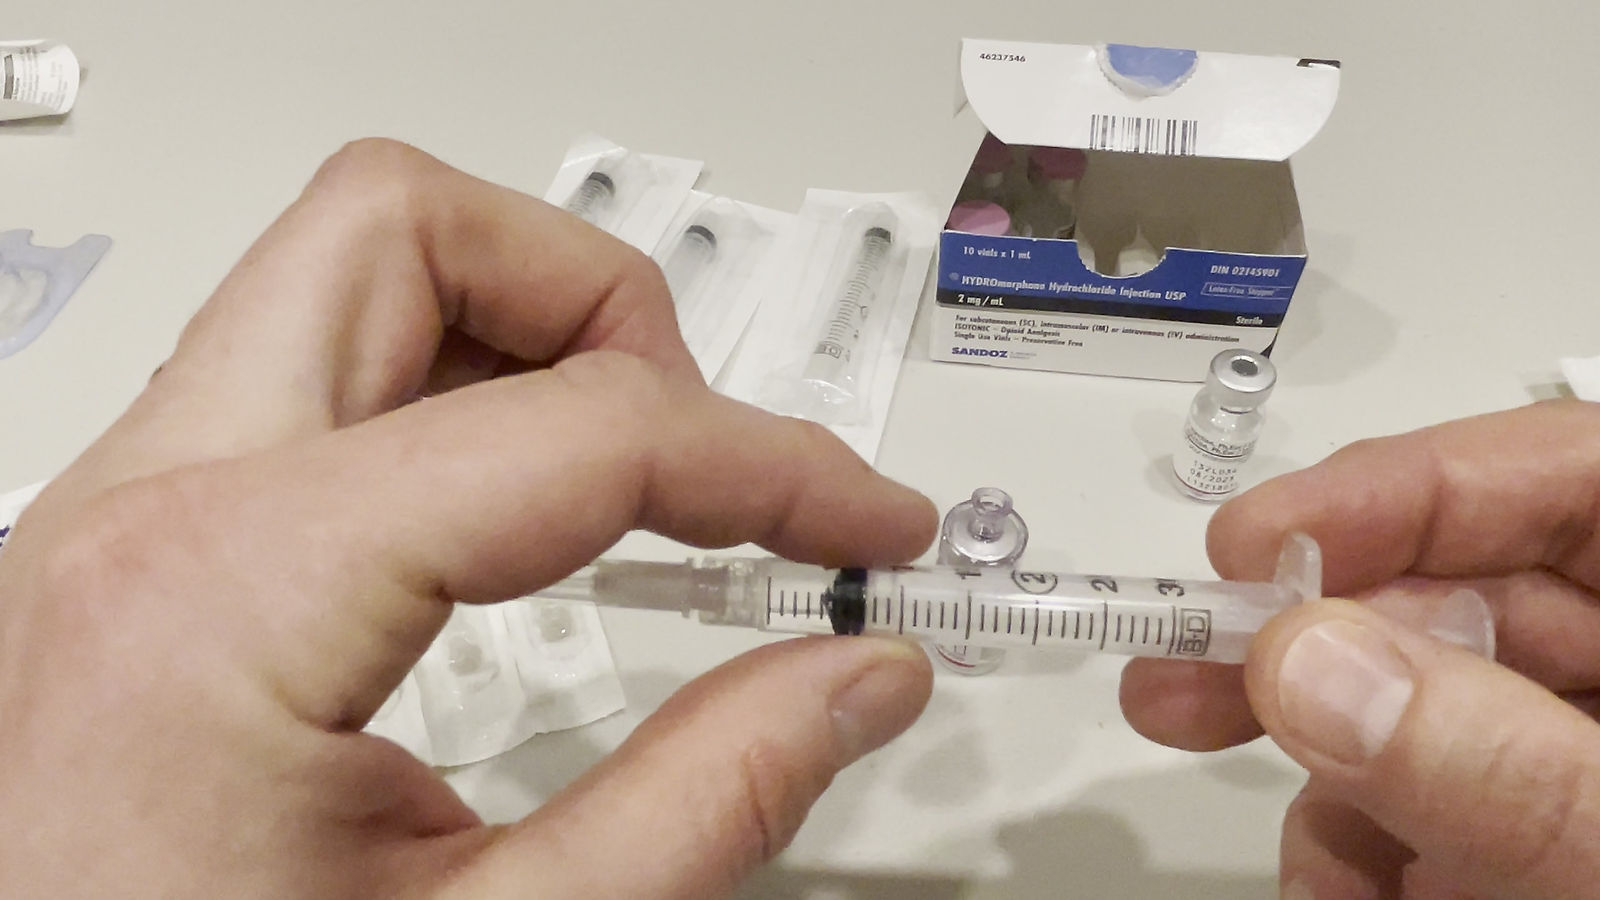 How to Prepare Syringes for Injection